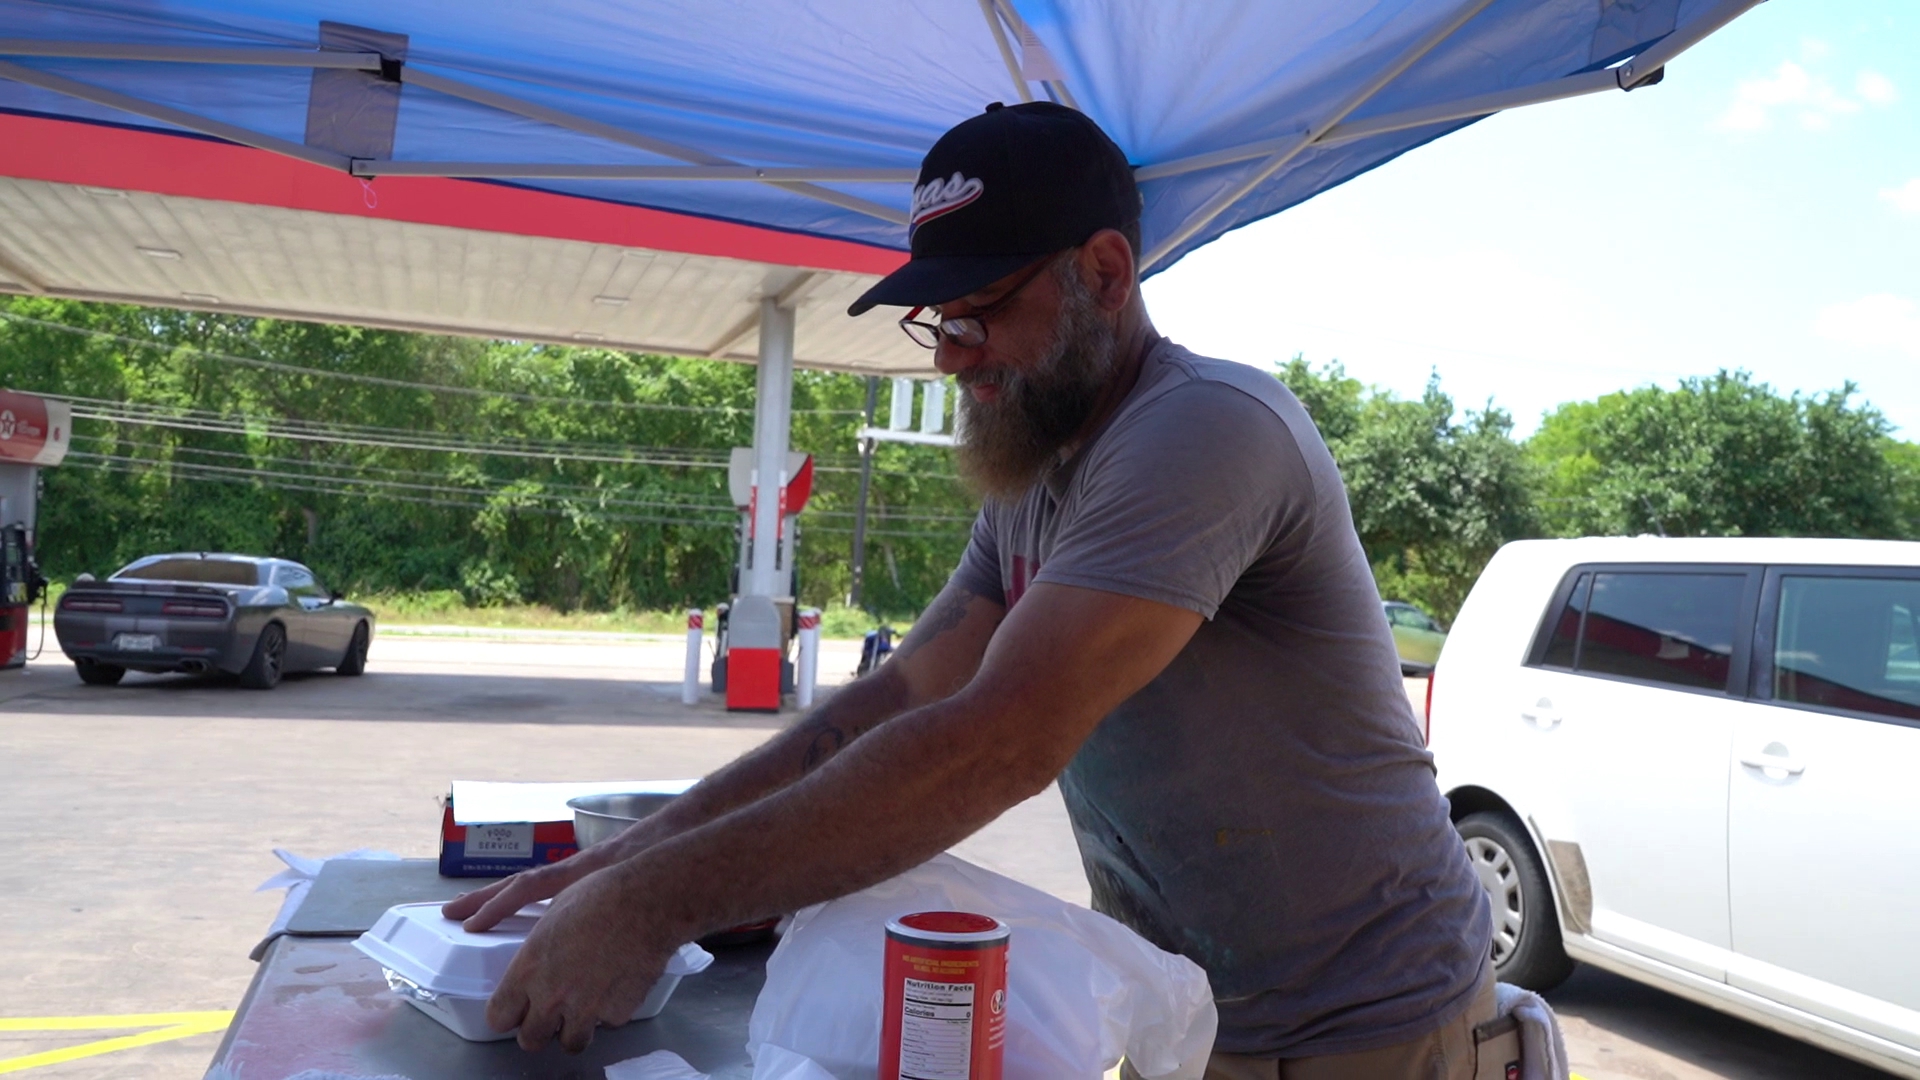 Saxx Williams owns Saxx's Tacos inside the Texaco gas station on Salt Springs Drive. It recently reopened after it was nearly destroyed in the May 21 SWAT standoff.